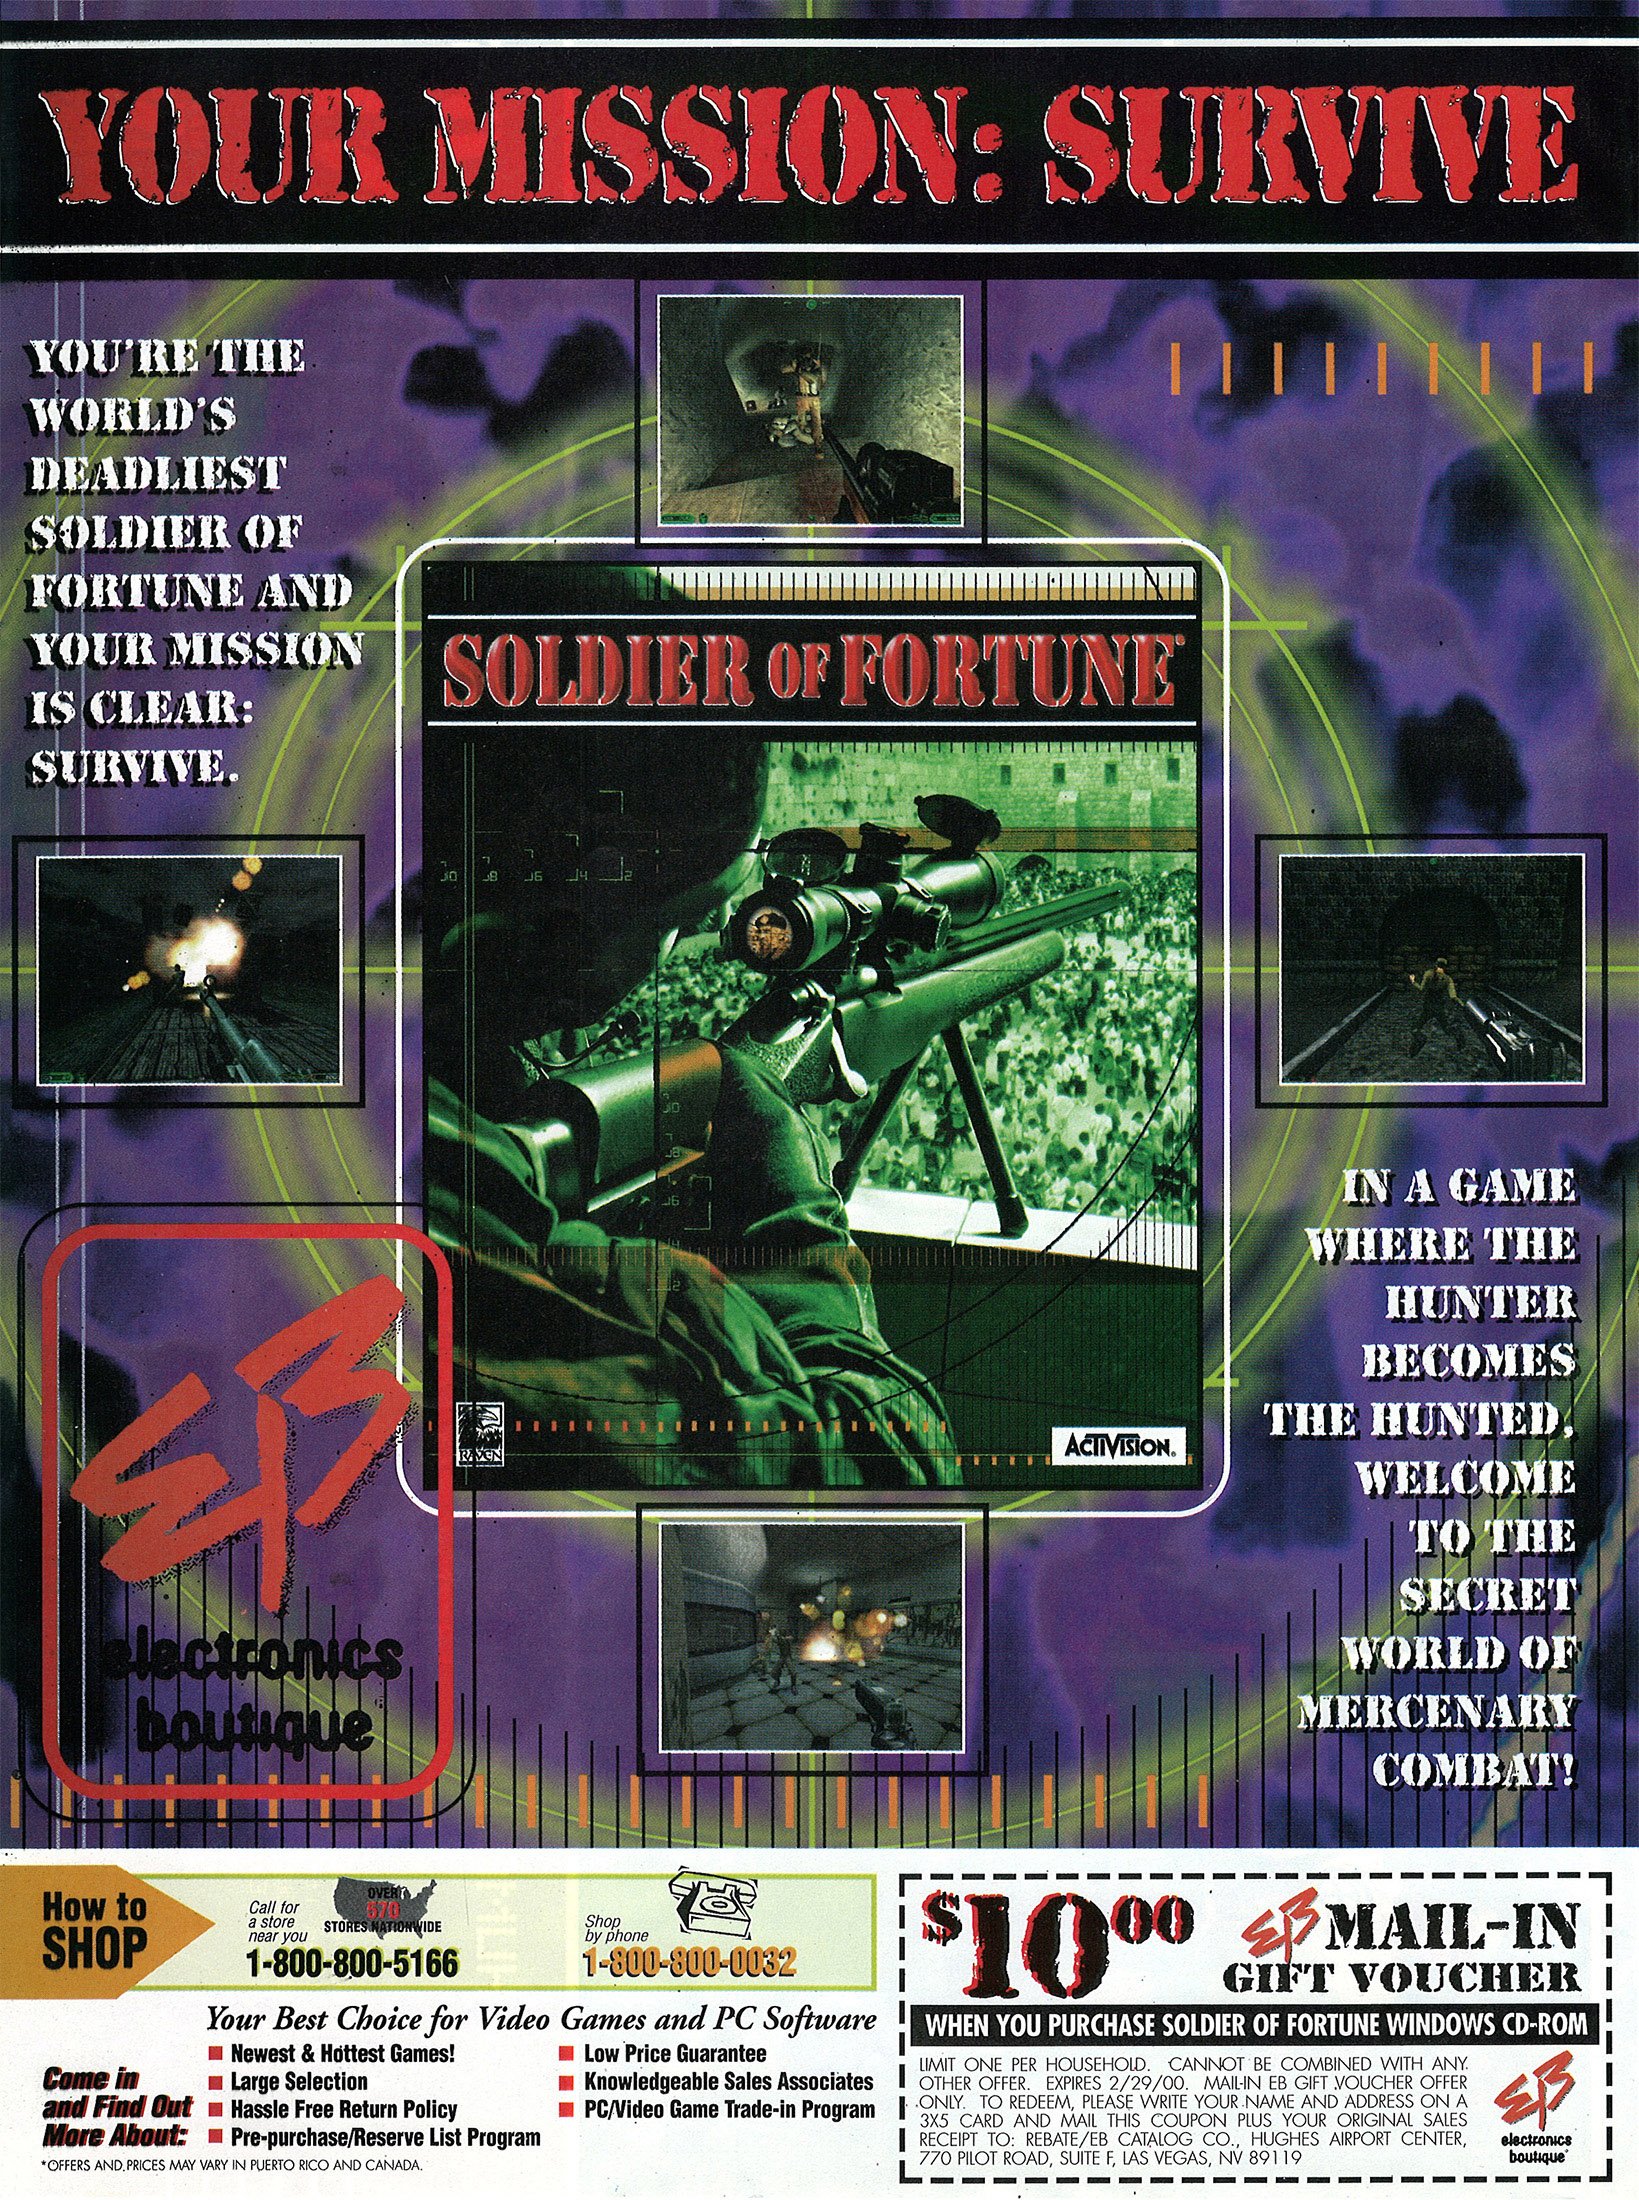 Soldier of Fortune EB coupon (March, 2000)